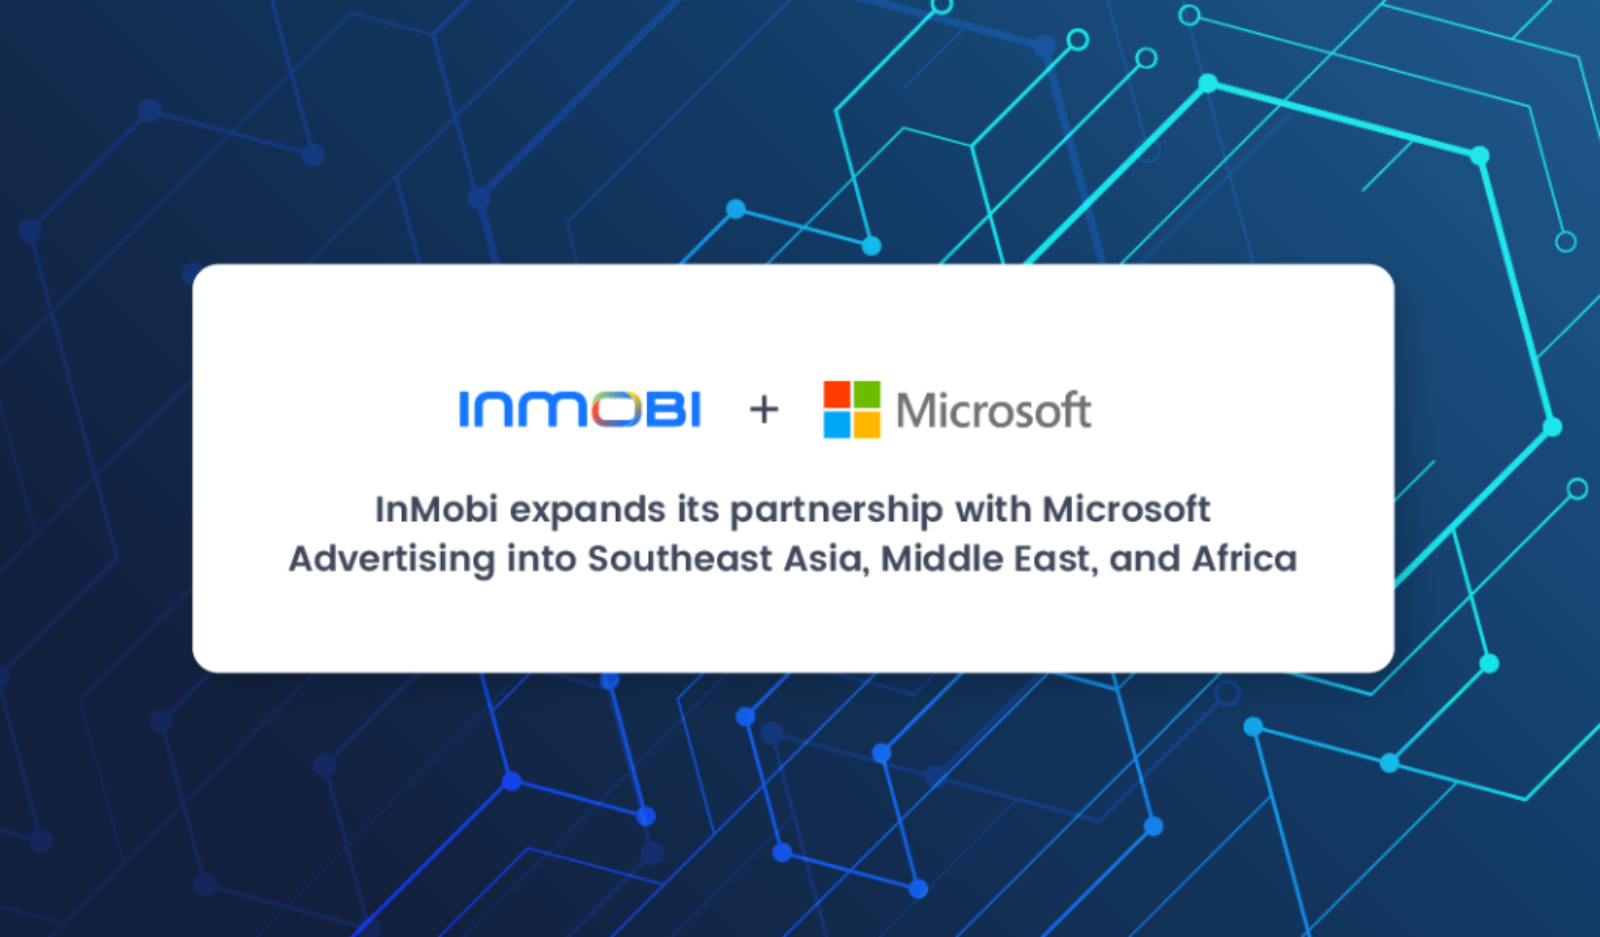 InMobi, Microsoft Advertising Extends Partnership Into SEA, Middle East, And Africa